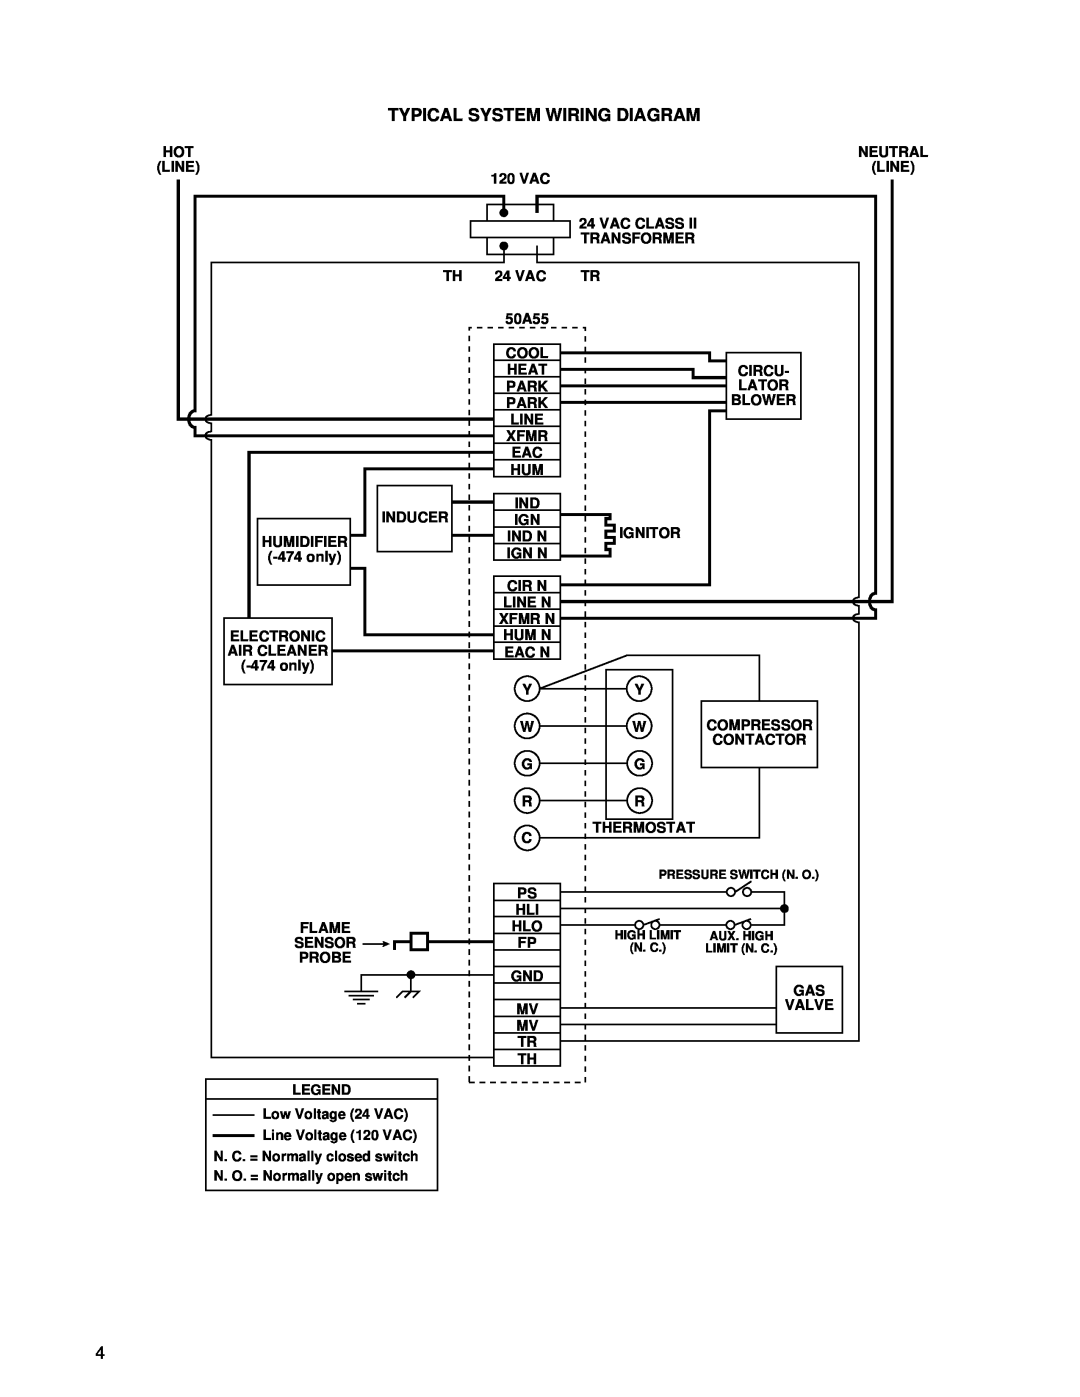 White Rodgers 50A55-474, 50A55-571 installation instructions Typical System Wiring Diagram 